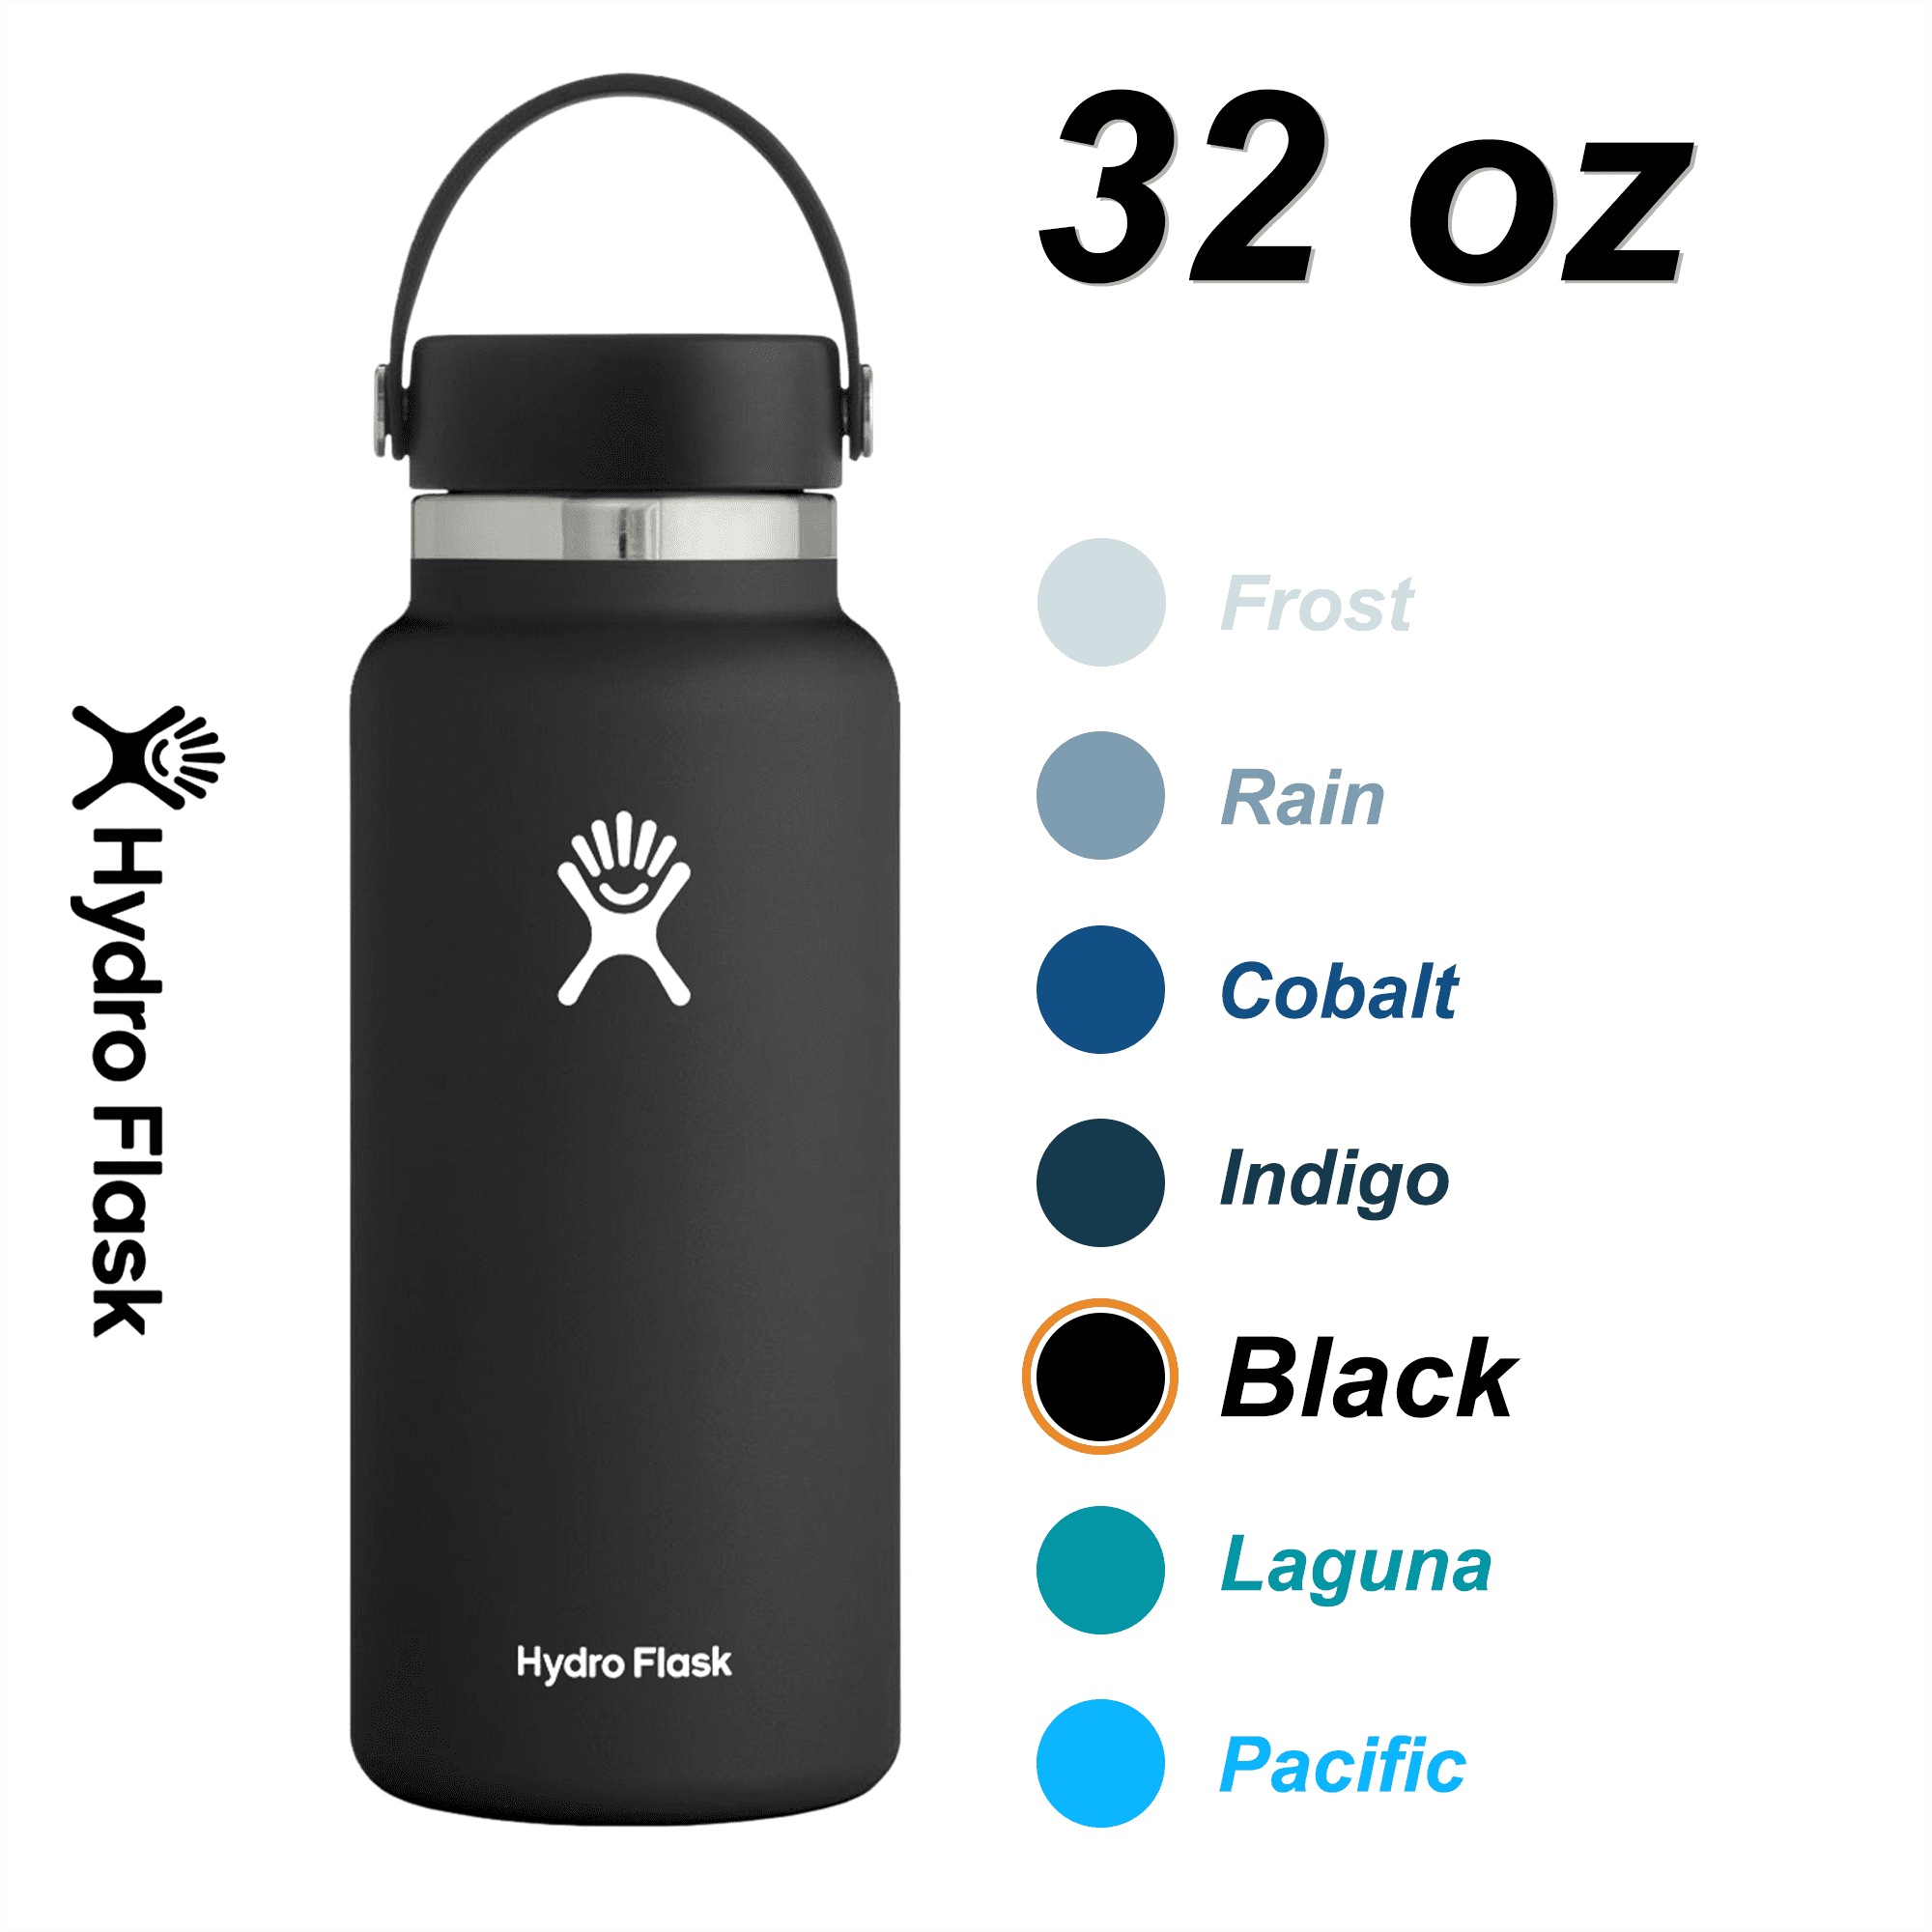 Hydro Flask 32 oz. Wide Mouth With Flex Cap Black 2.0